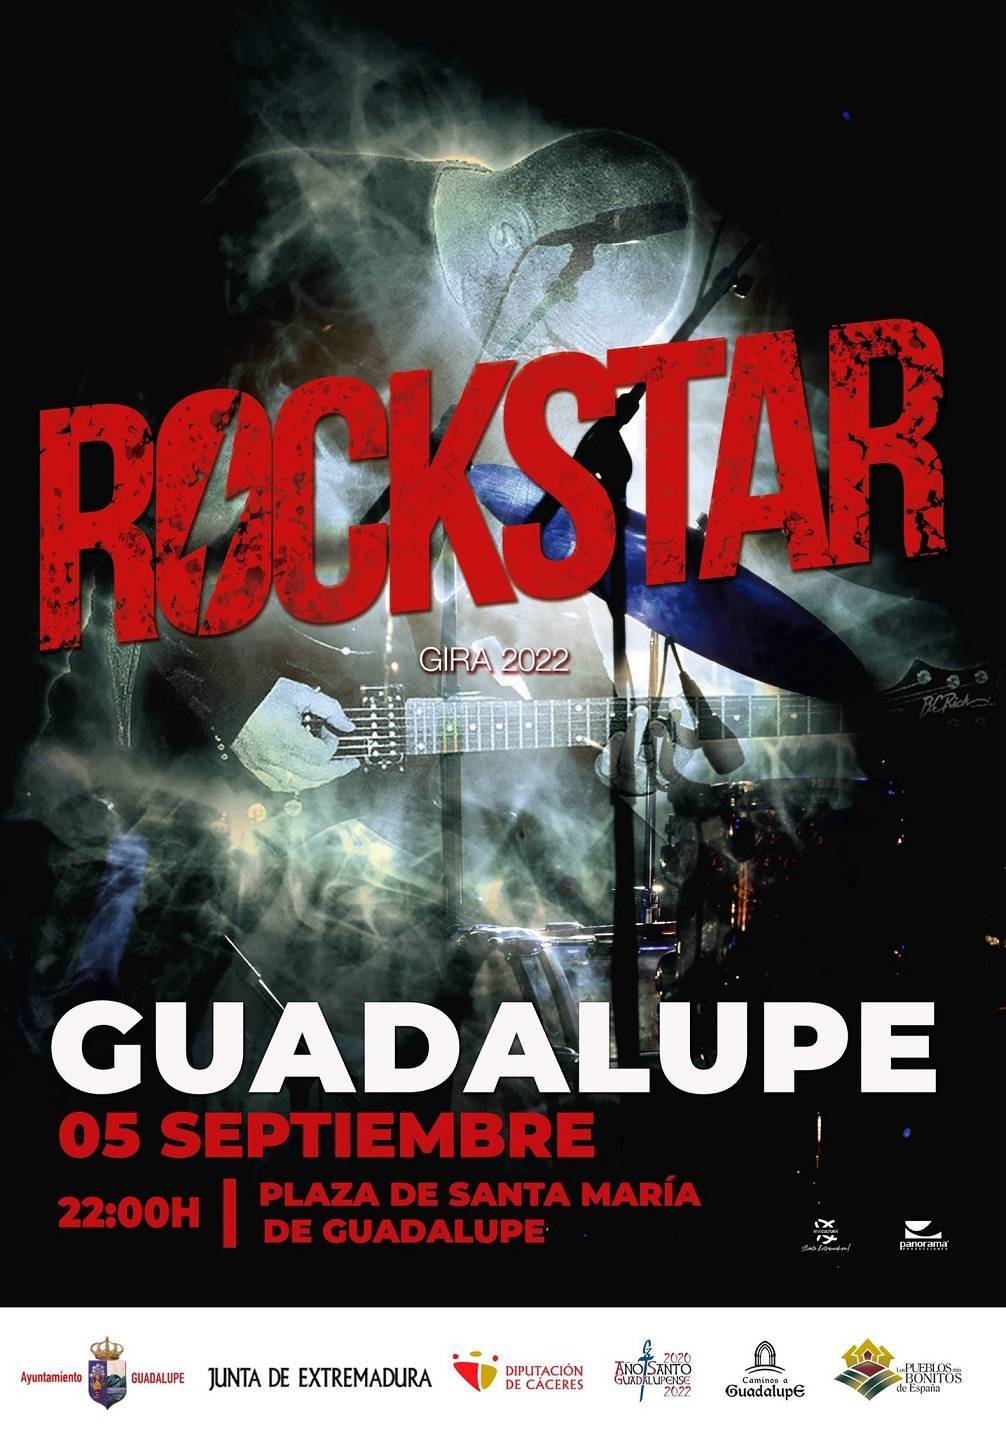 Rockstar Coverband (2022) - Guadalupe (Cáceres)